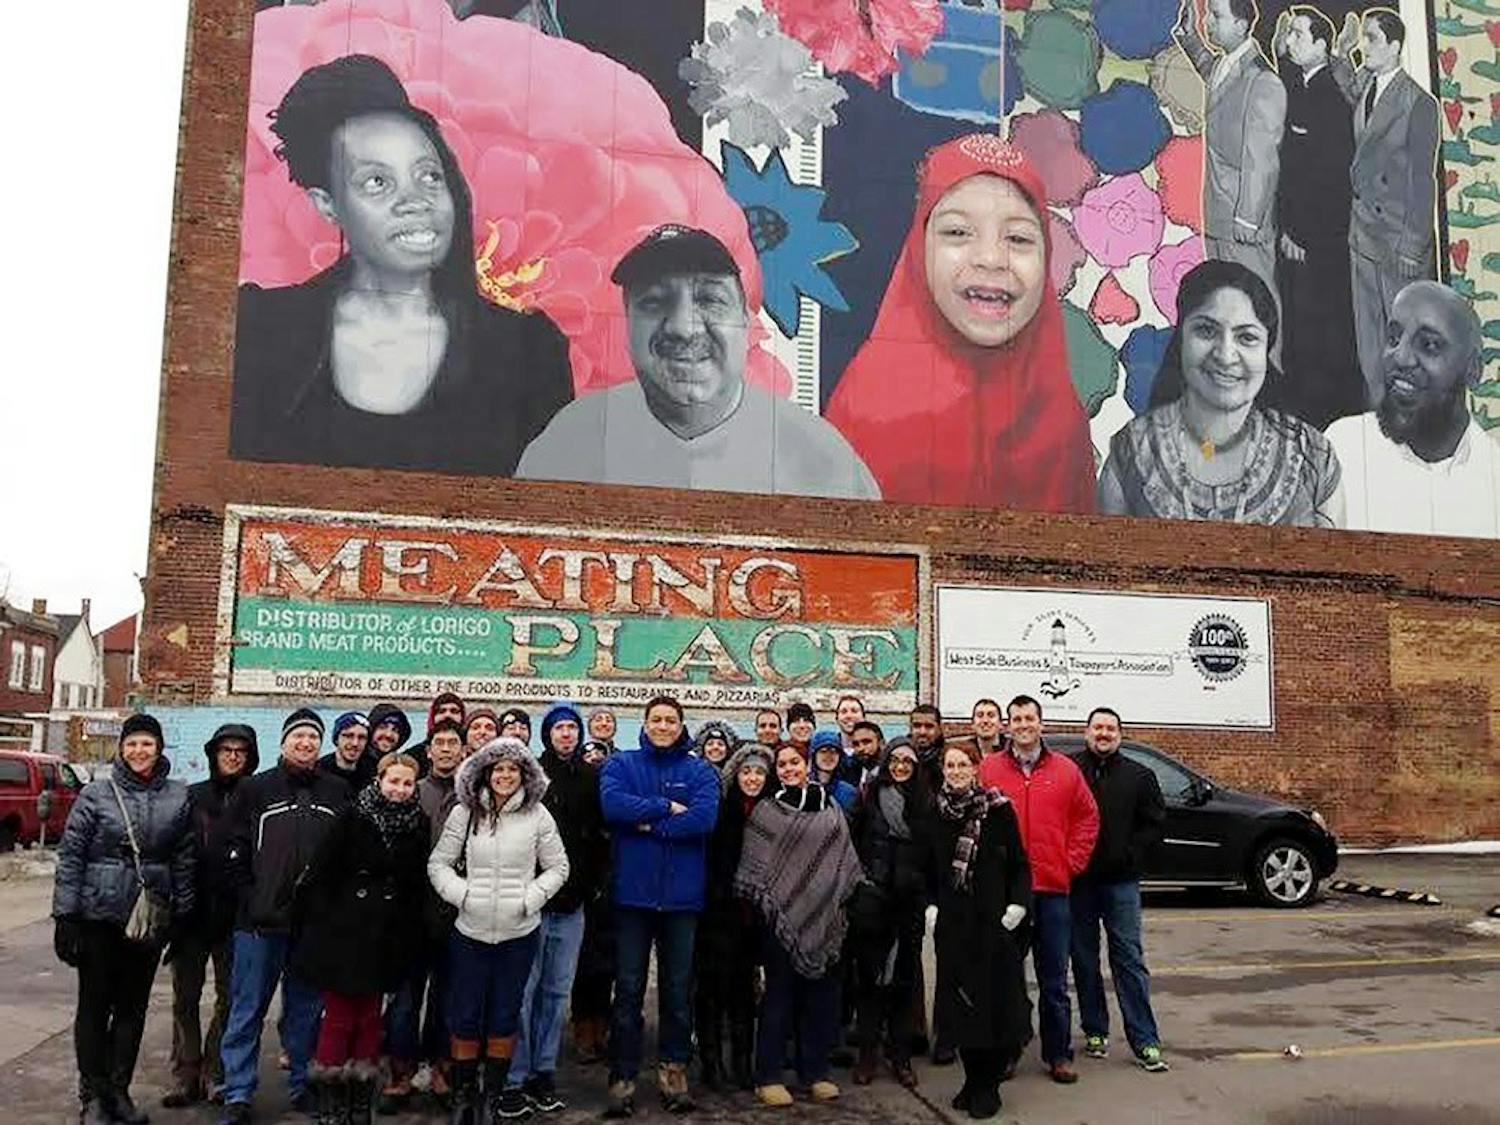 The 2014-15 Western New York Prosperity Scholars met with several refugees and immigrants who have become leaders in their Buffalo neighborhood. The scholarship encourages the development of more leaders in Western New York.